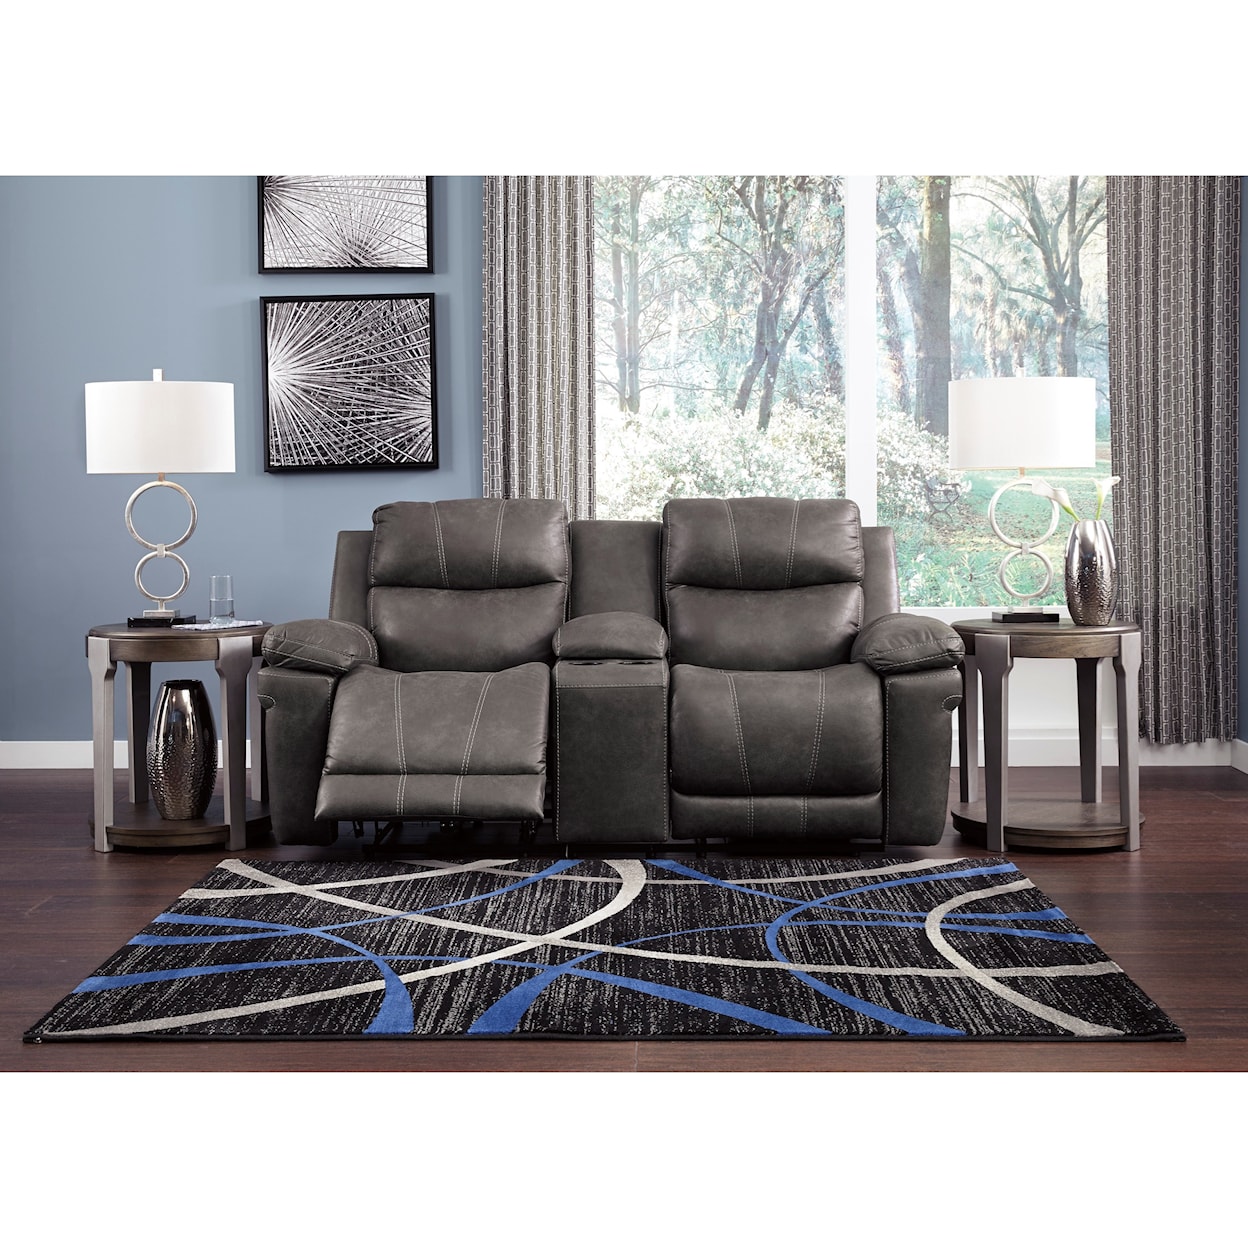 Signature Design by Ashley Erlangen Power Reclining Loveseat with Console